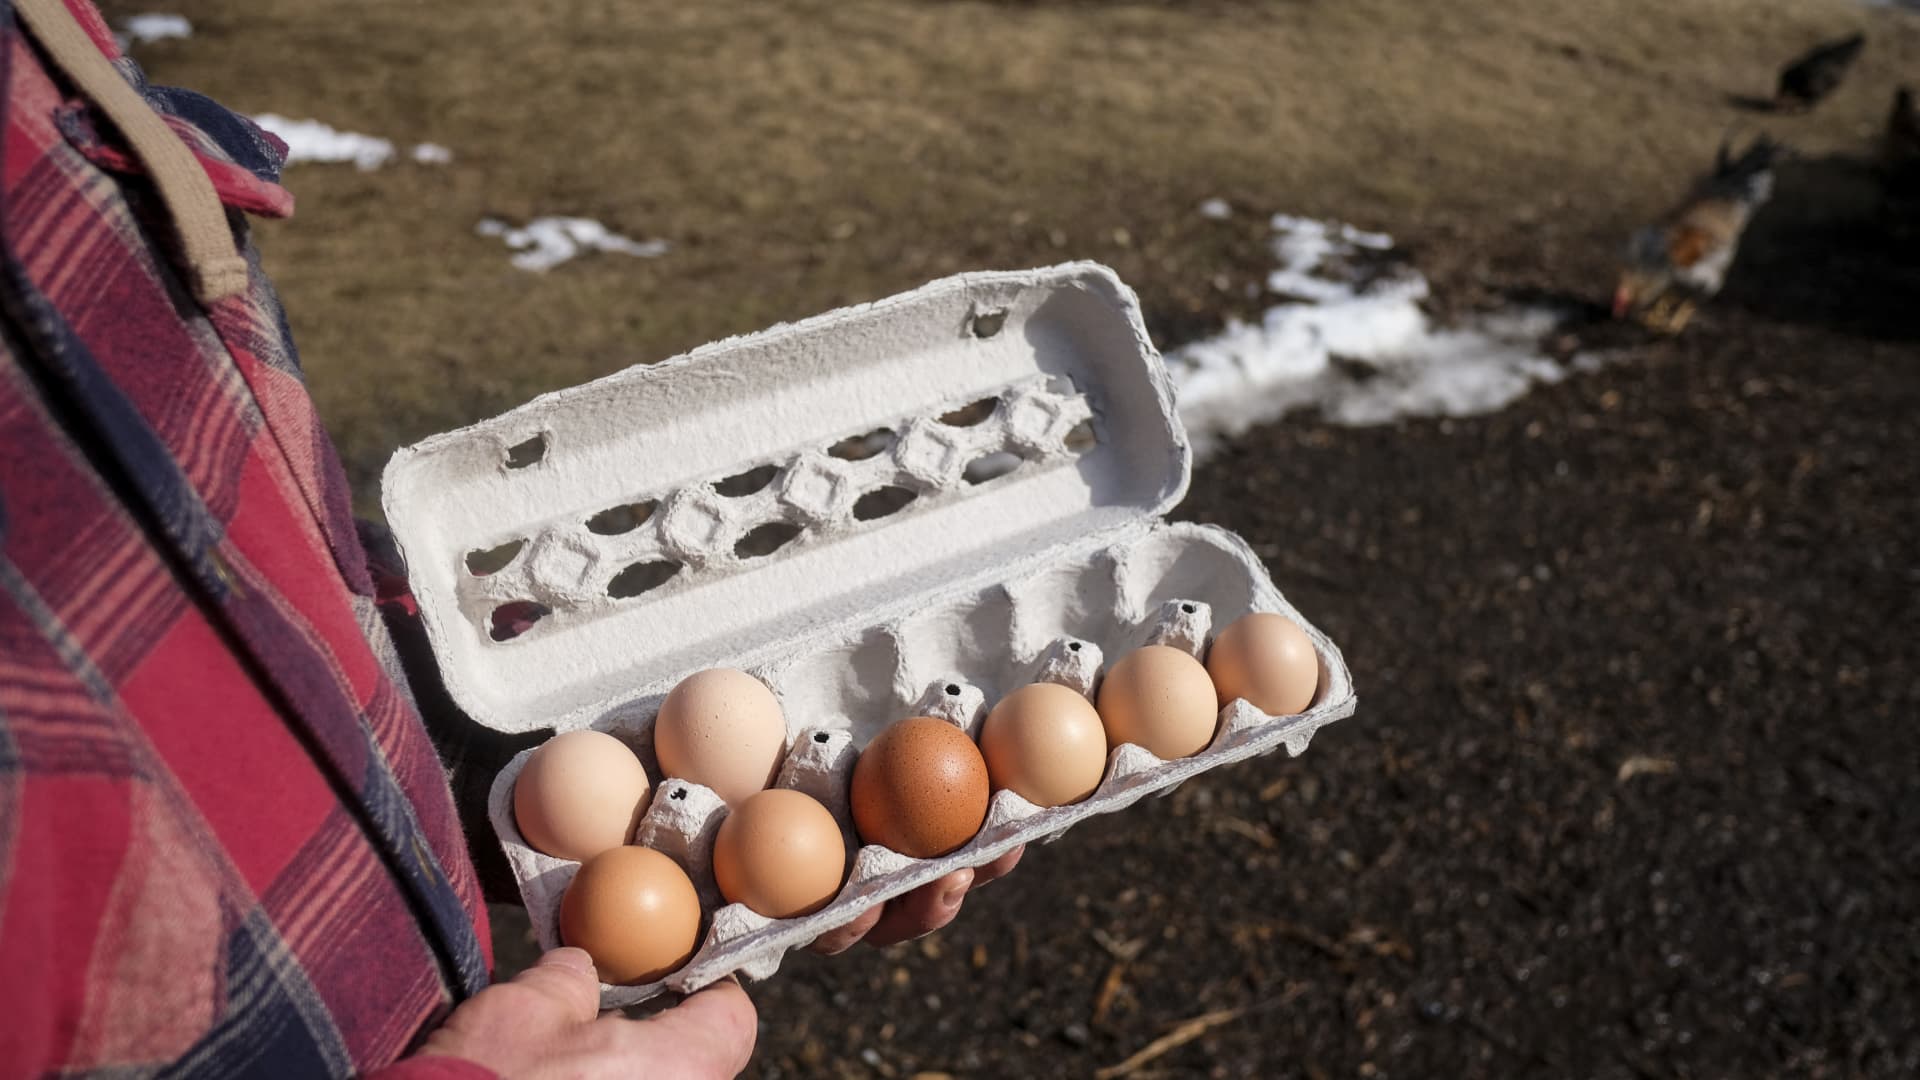 Retail egg prices fell in February — but price drop may not last long